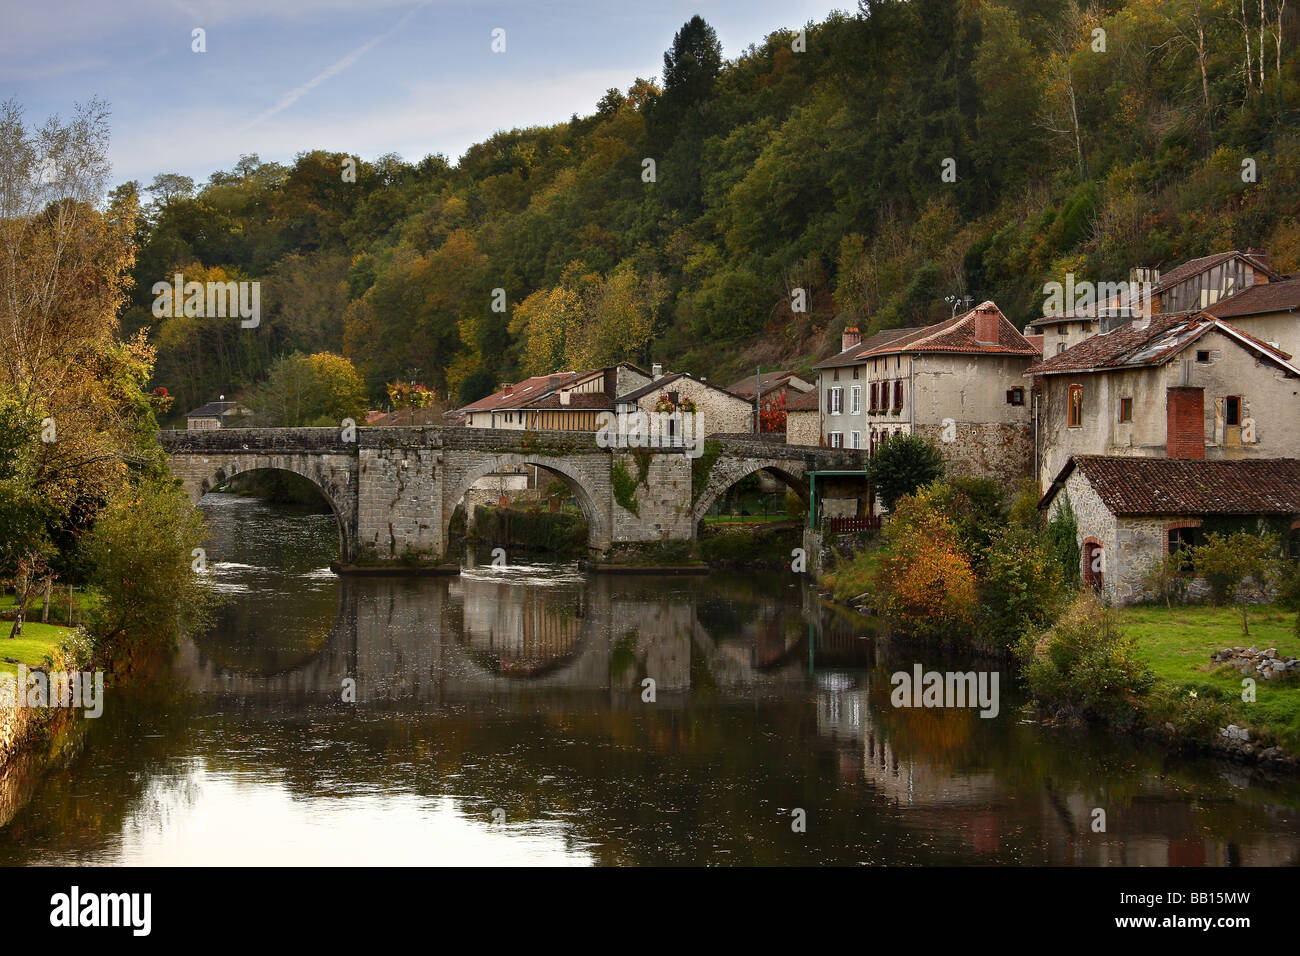 A view of the old town bridge at St Leonard de Noblat. Limousin France. Stock Photo